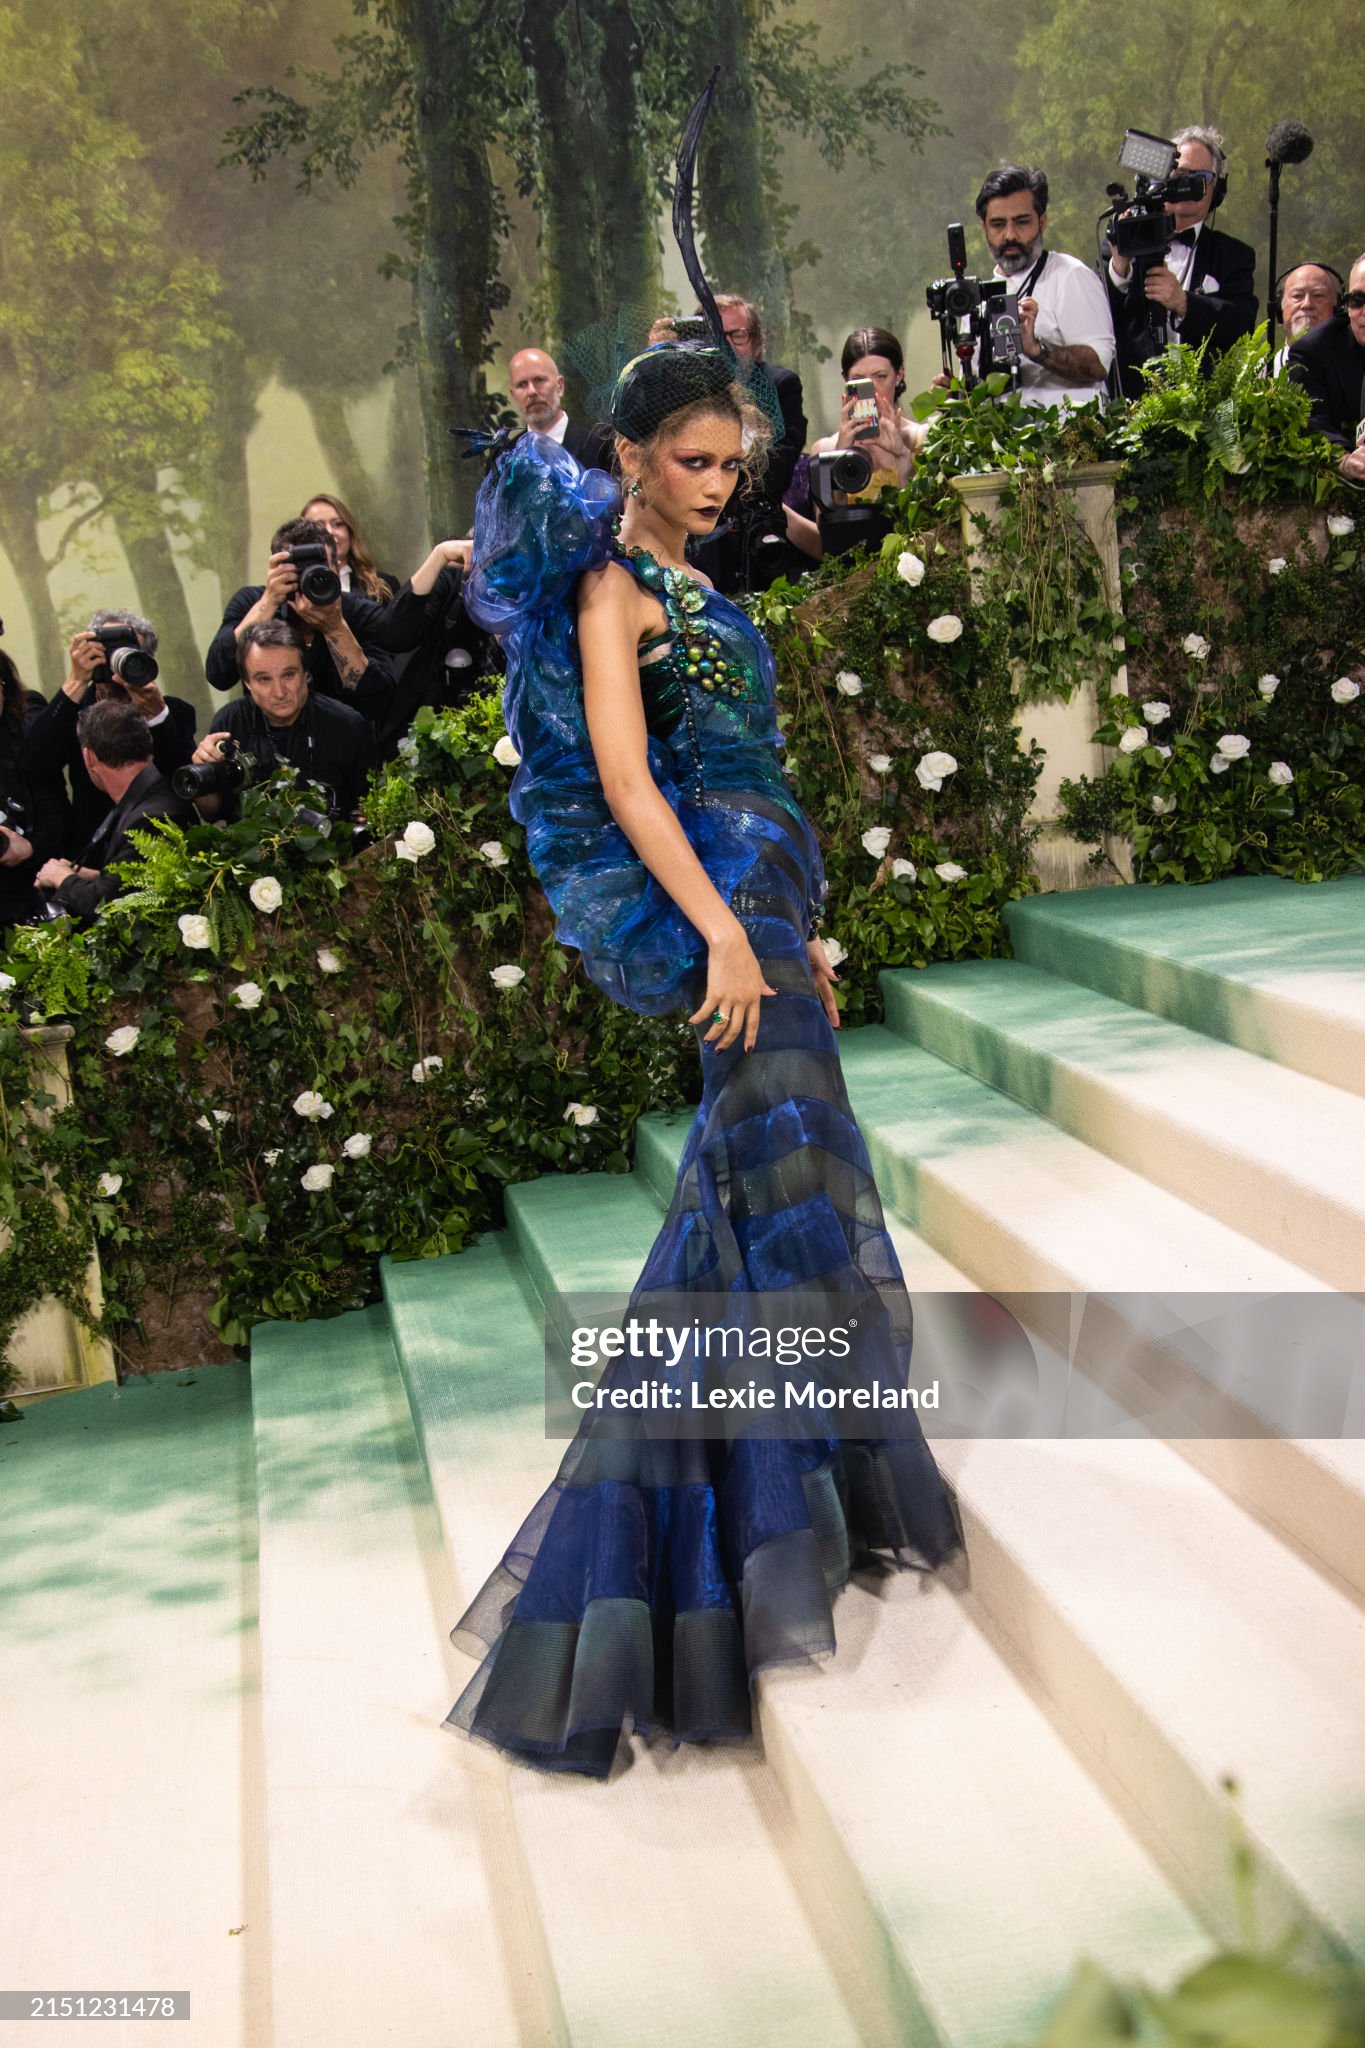 gettyimages-2151231478-2048x2048.jpg